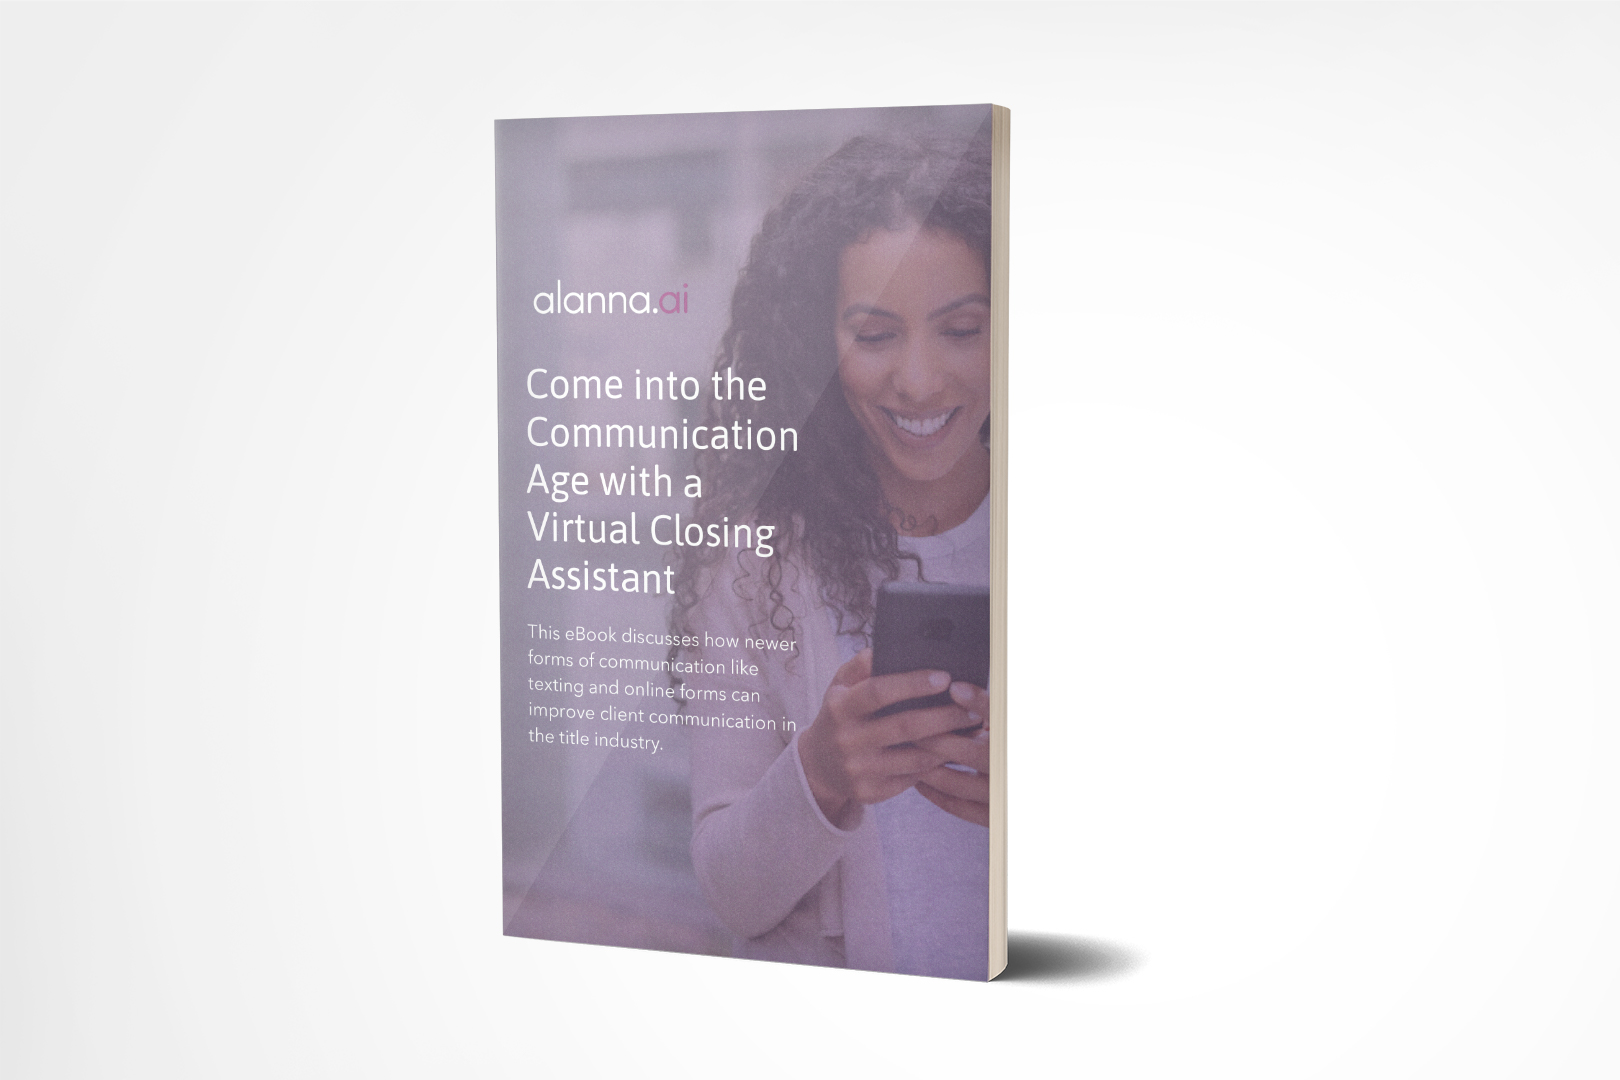 Come into the Communication Age with a Virtual Closing Assistant